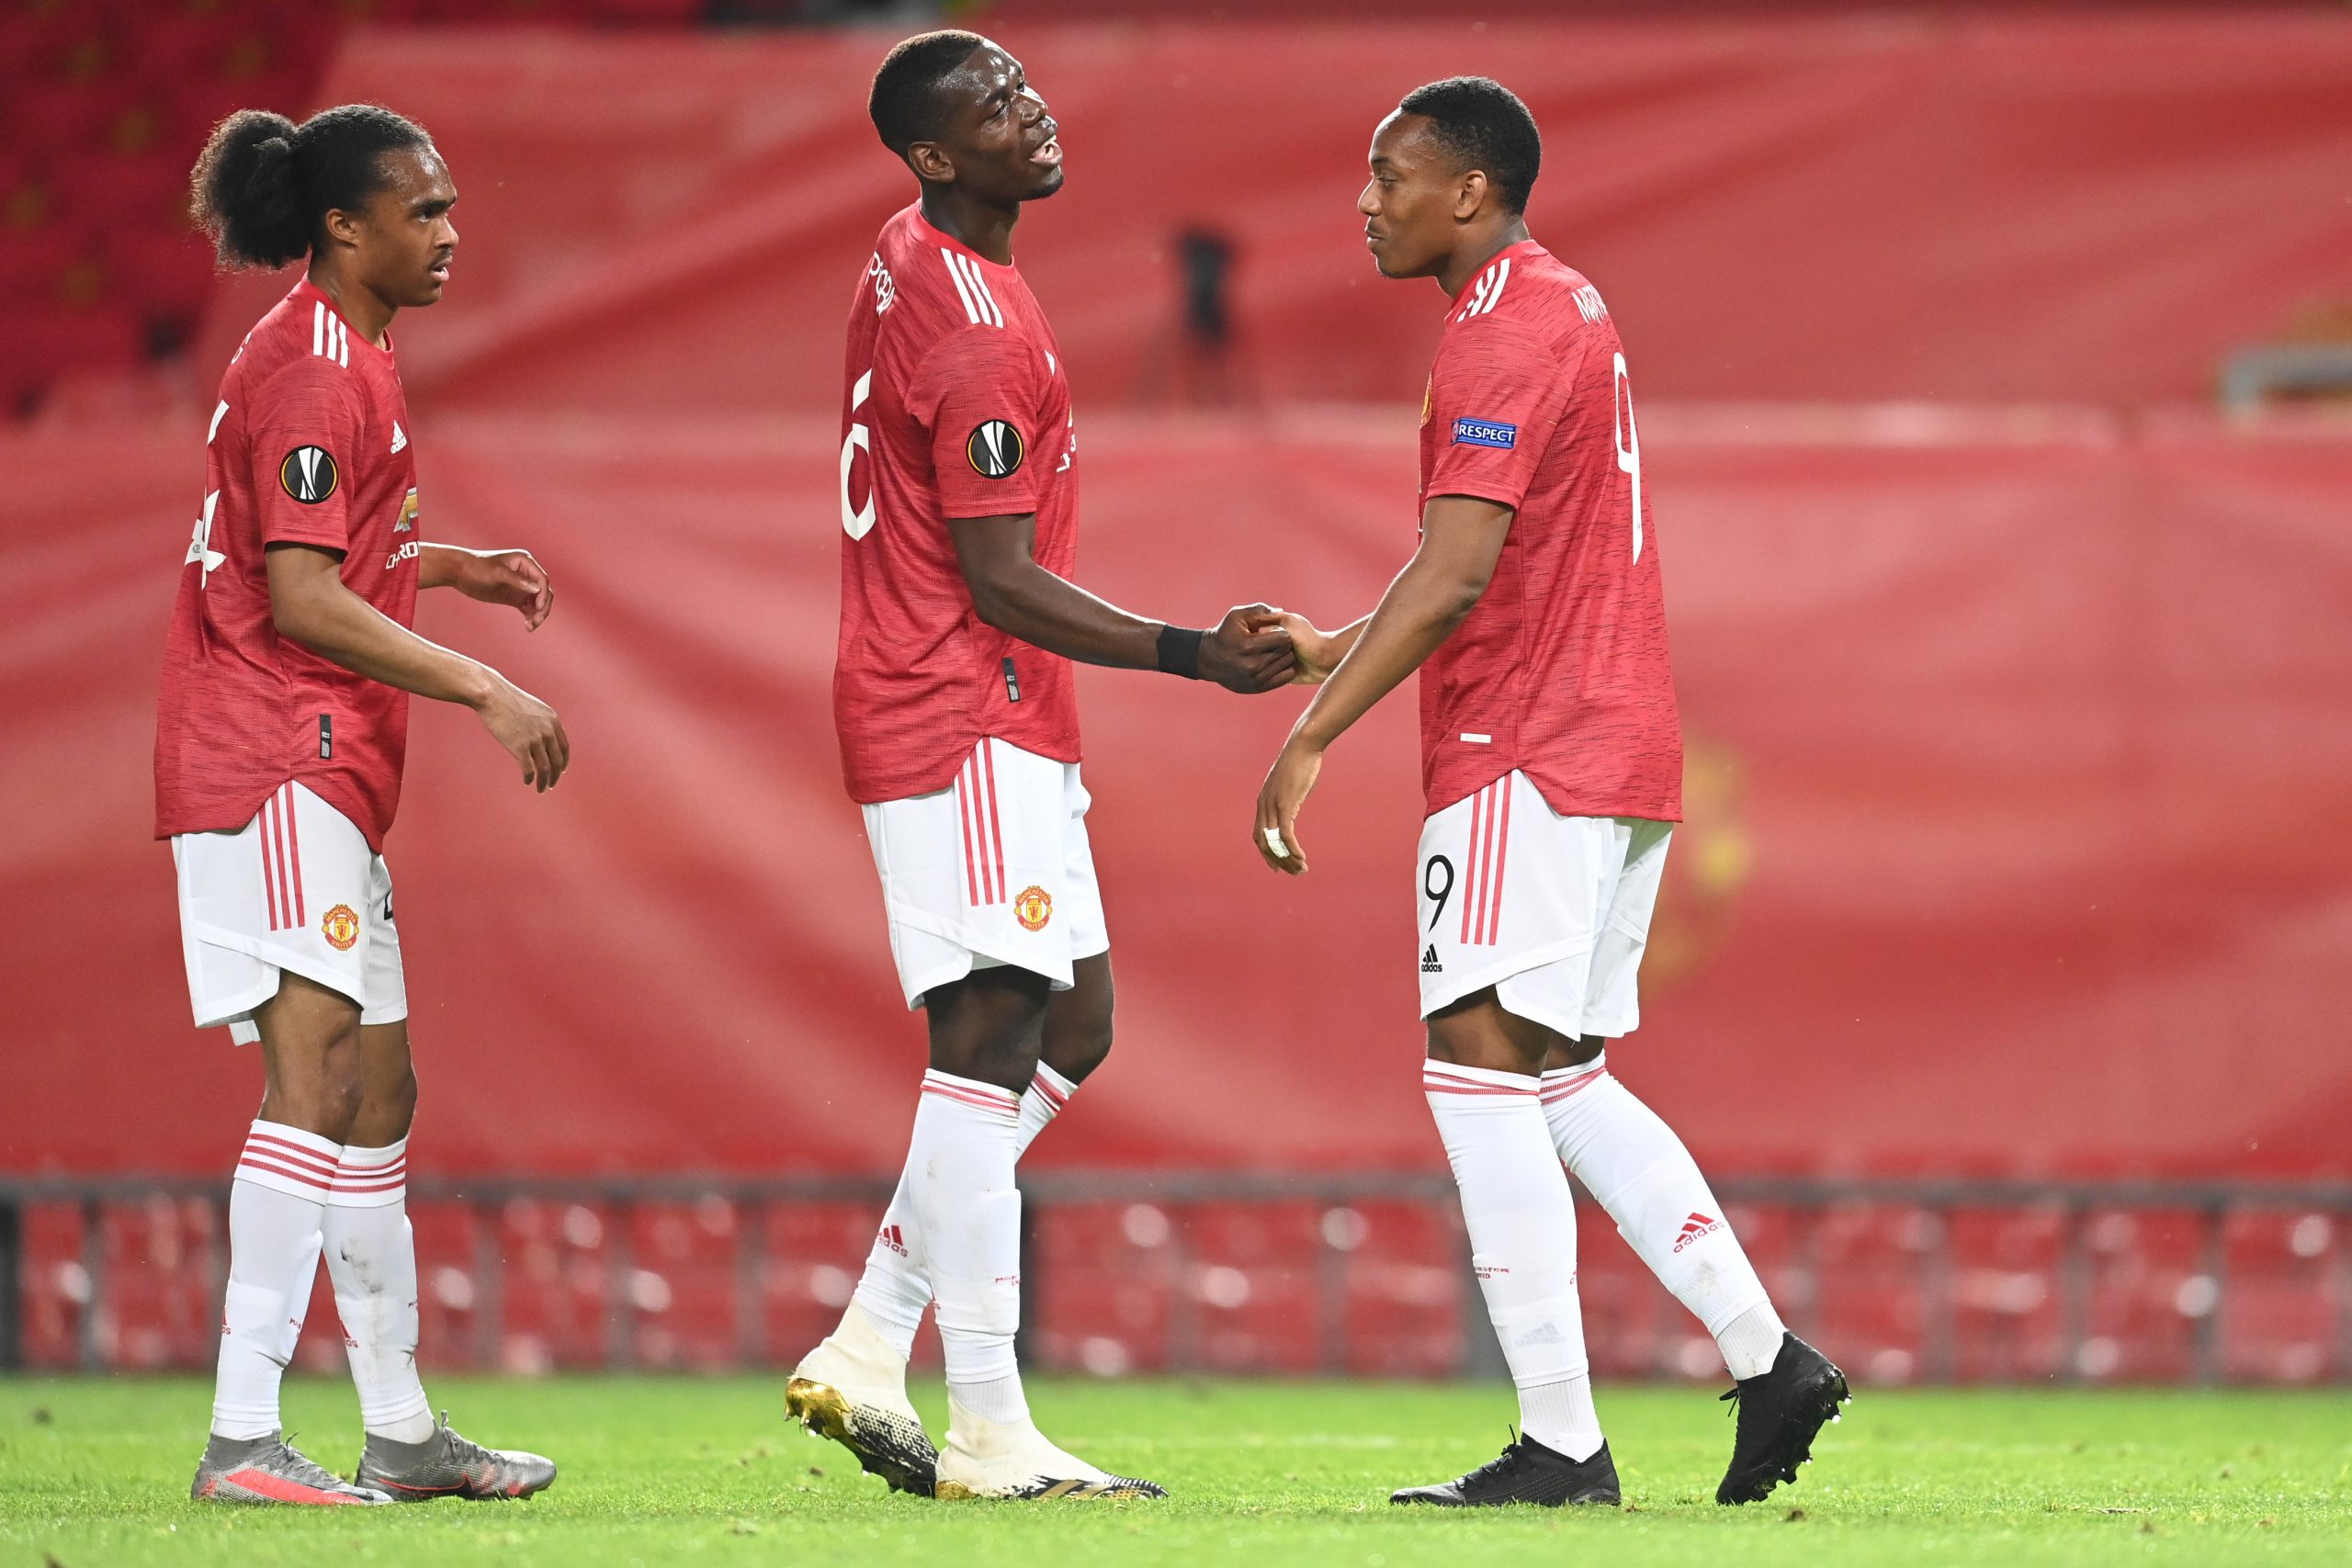 3 ways how Manchester United can tactically outwit Sevilla (Man United players celebrating in the picture)